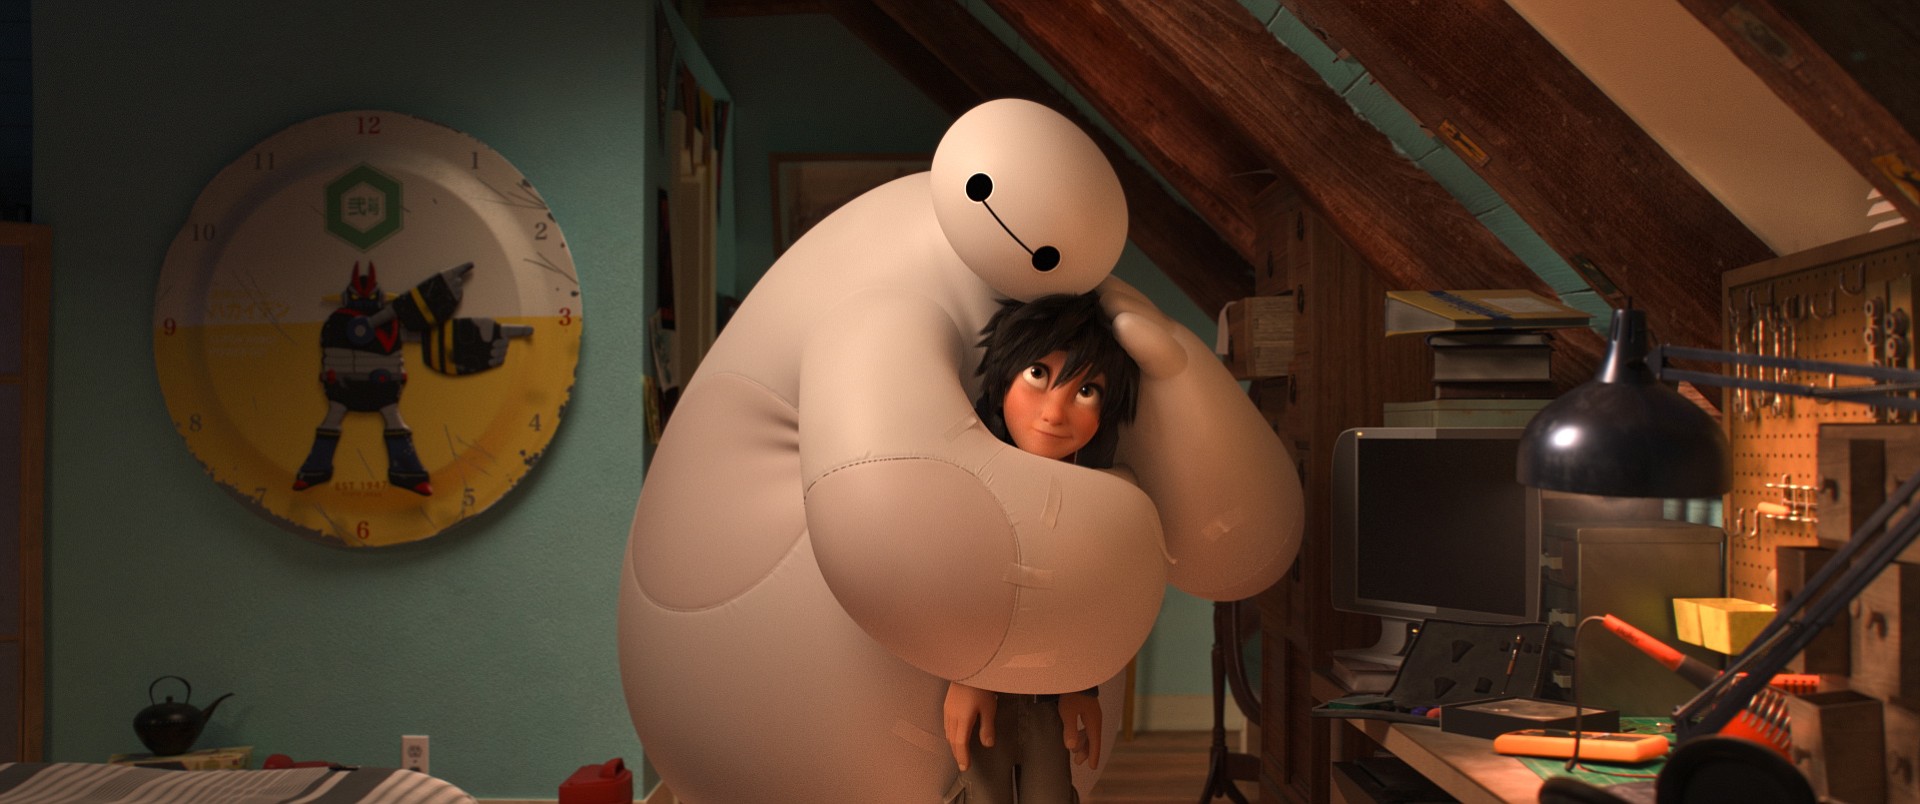 &quot;Big Hero 6&quot; will be screened at two community movie nights, at Battle Ground Village and Fruit Valley Park.